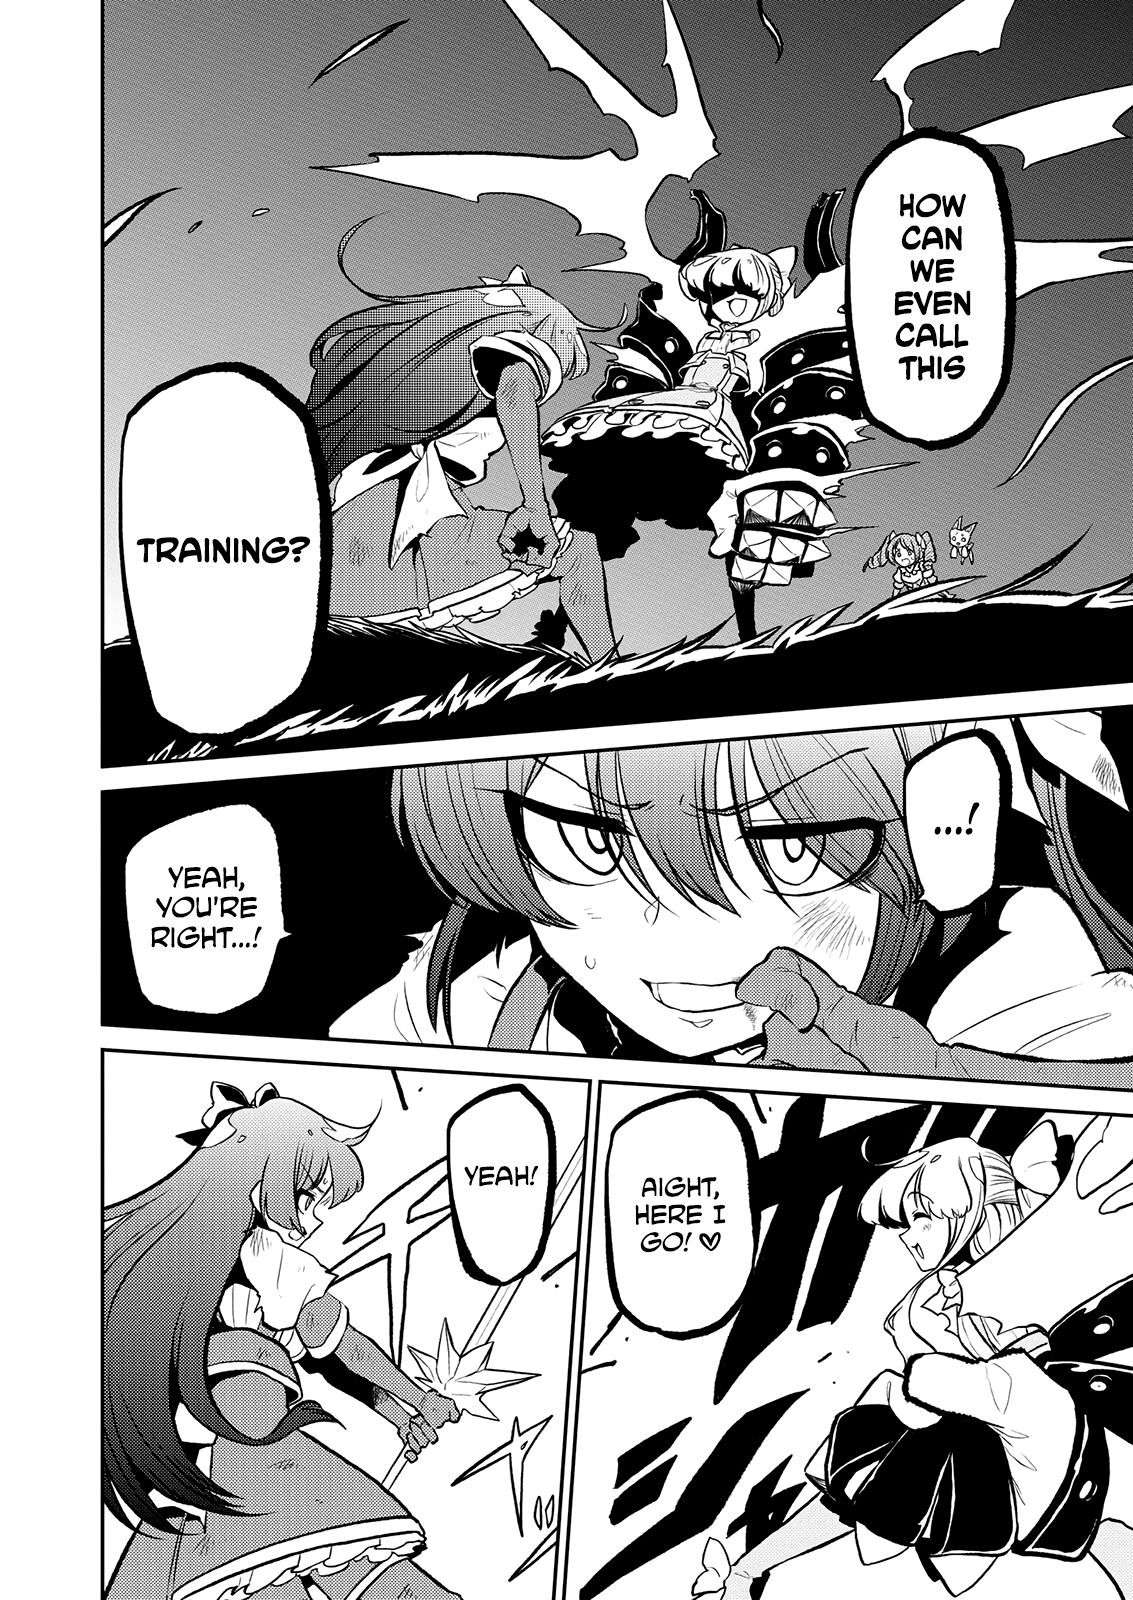 Gushing over Magical Girls - chapter 11 - #3